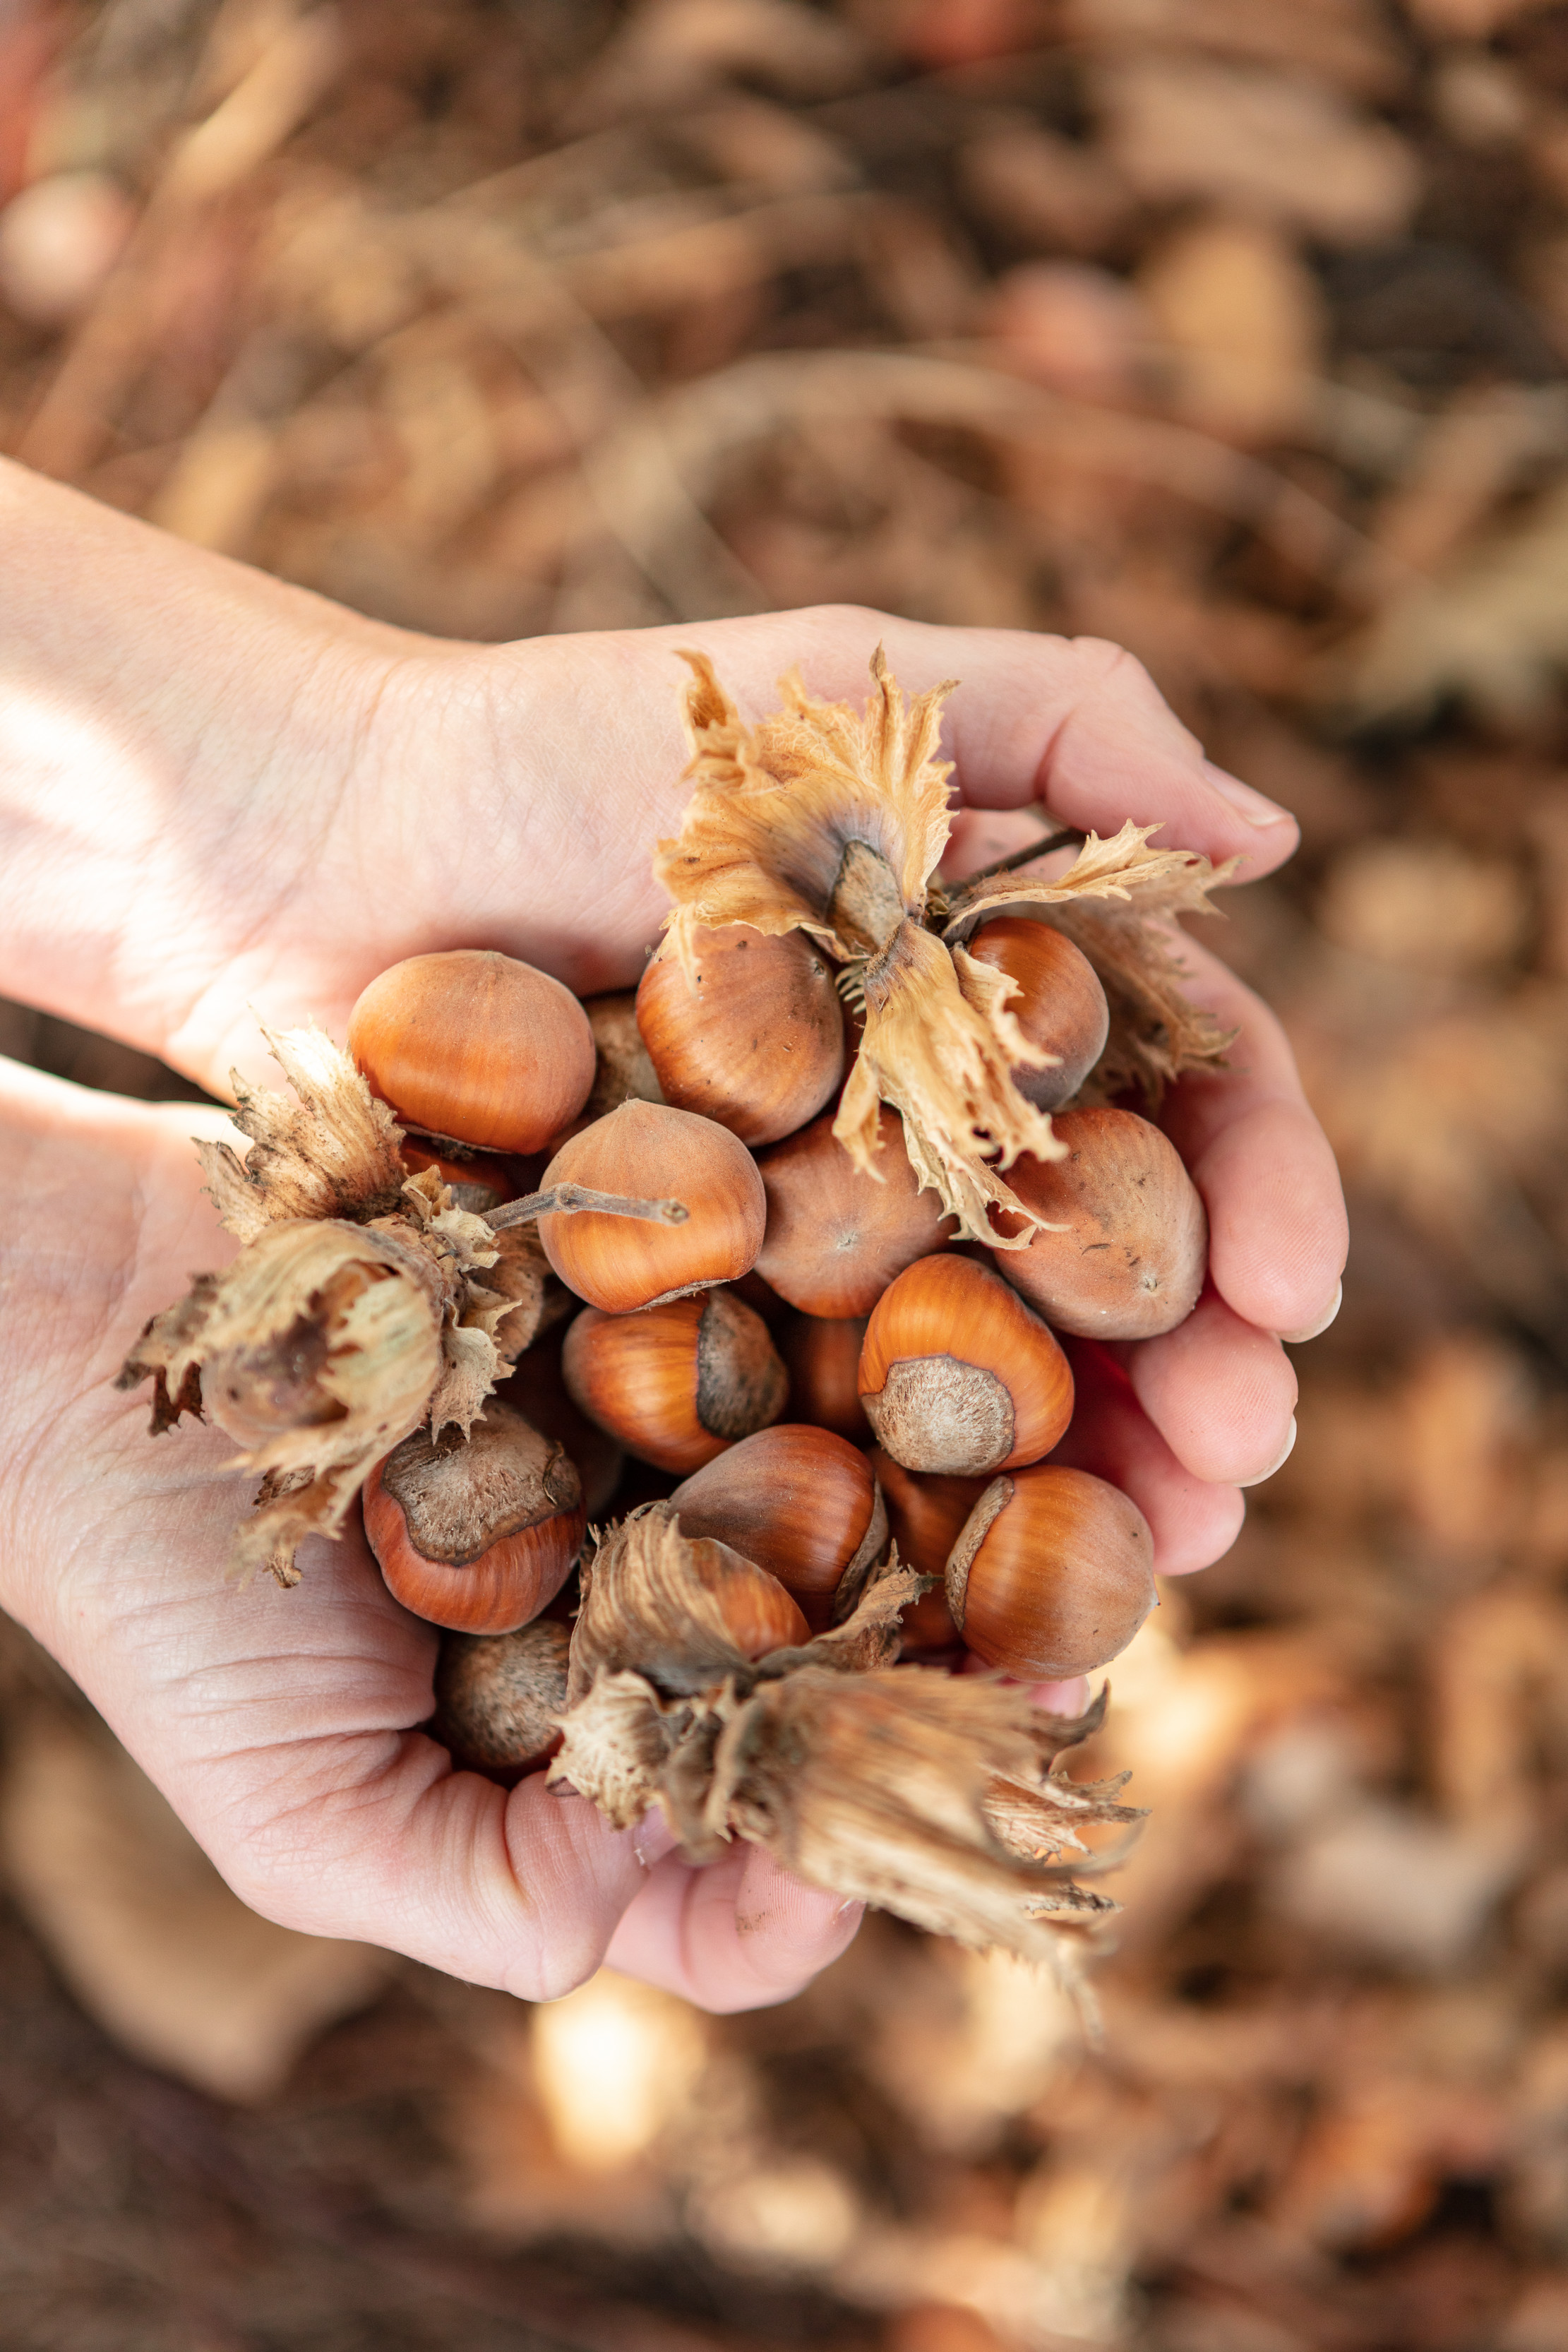 Close up image of hands holding a bunch of hazelnuts at the Hazelbrae at Hagley.